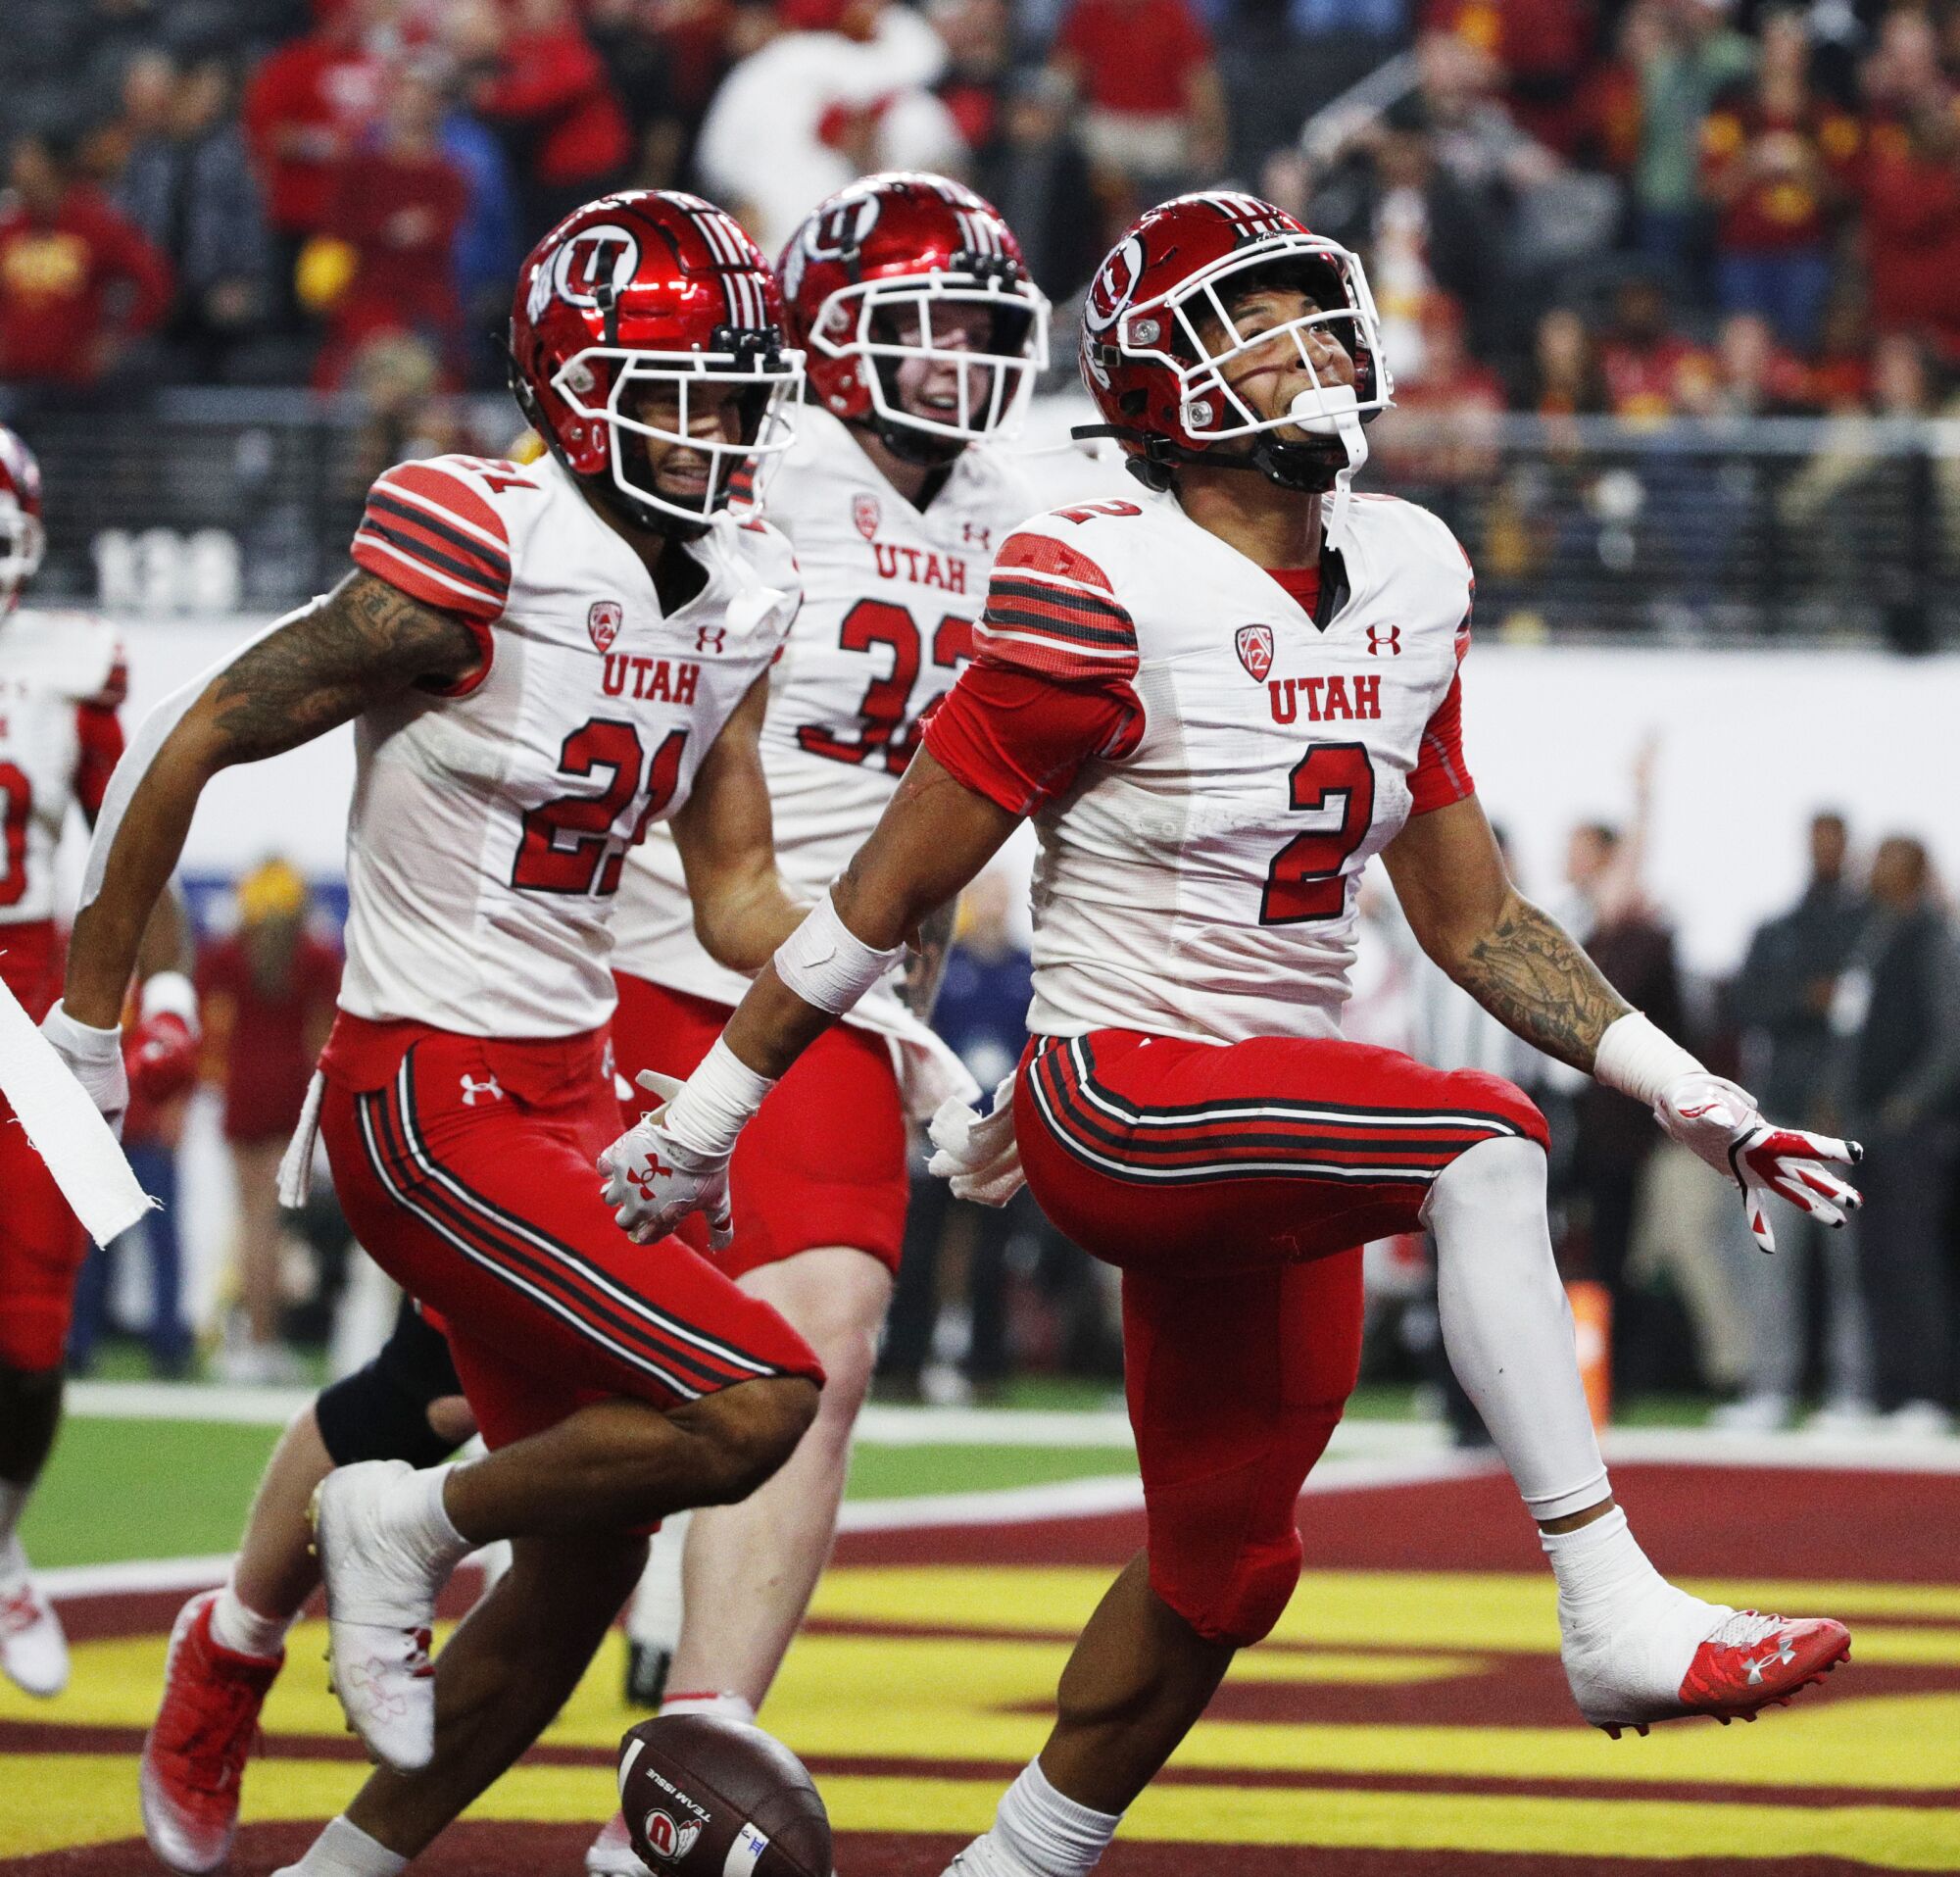 Utah Utes running back Micah Bernard (2) scores late in the fourth quarter to seal the win.